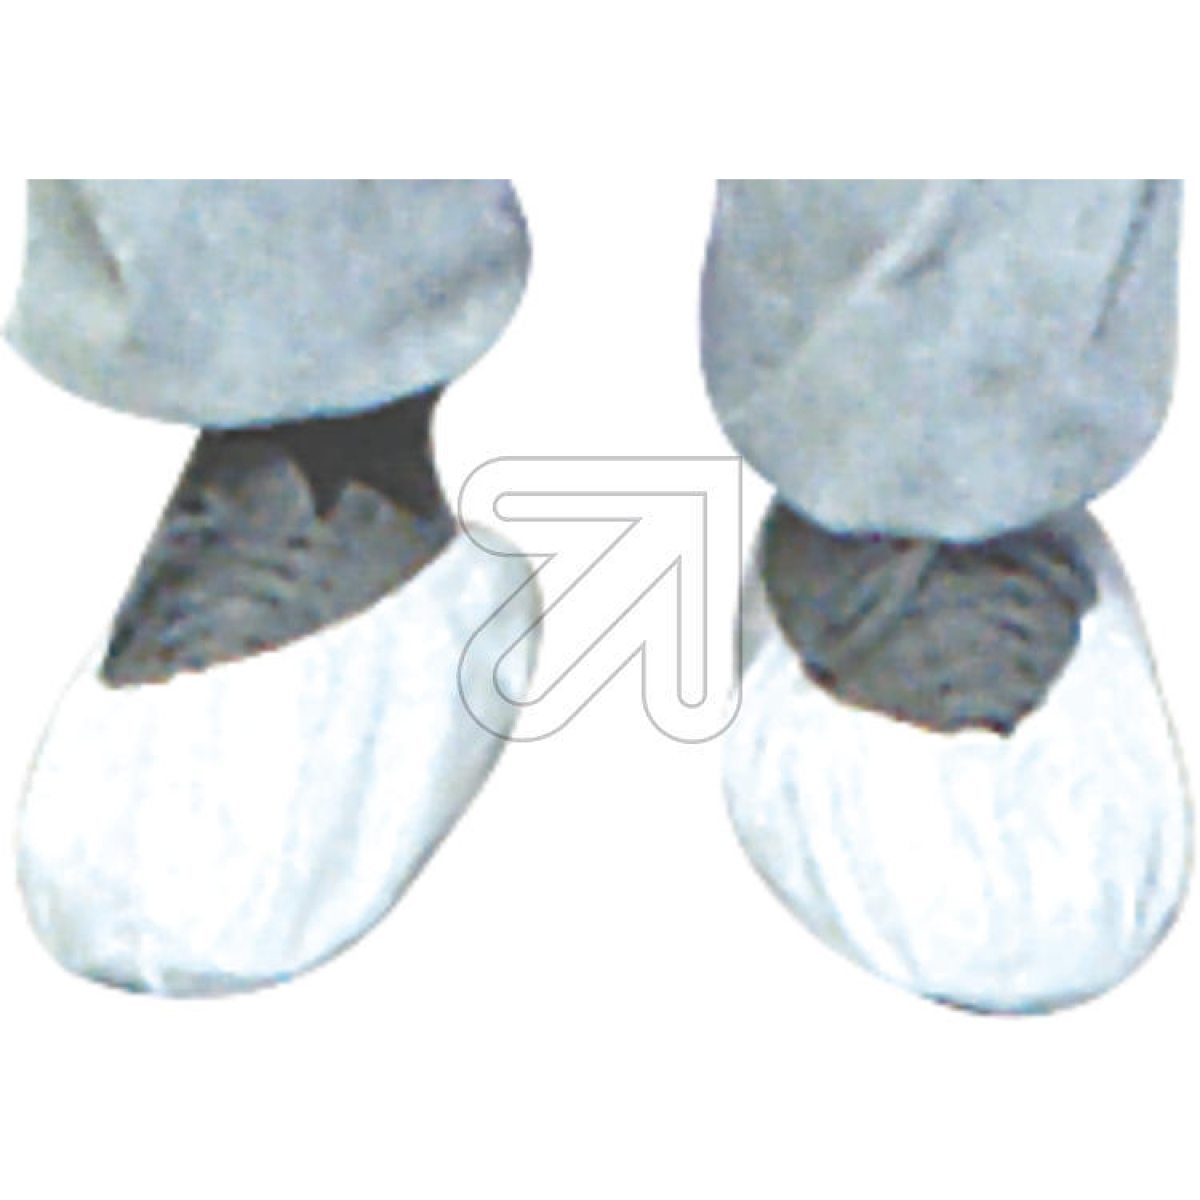 Baruthia Lothar Wolf GmbHDisposable overshoes-Price for 5 Pair